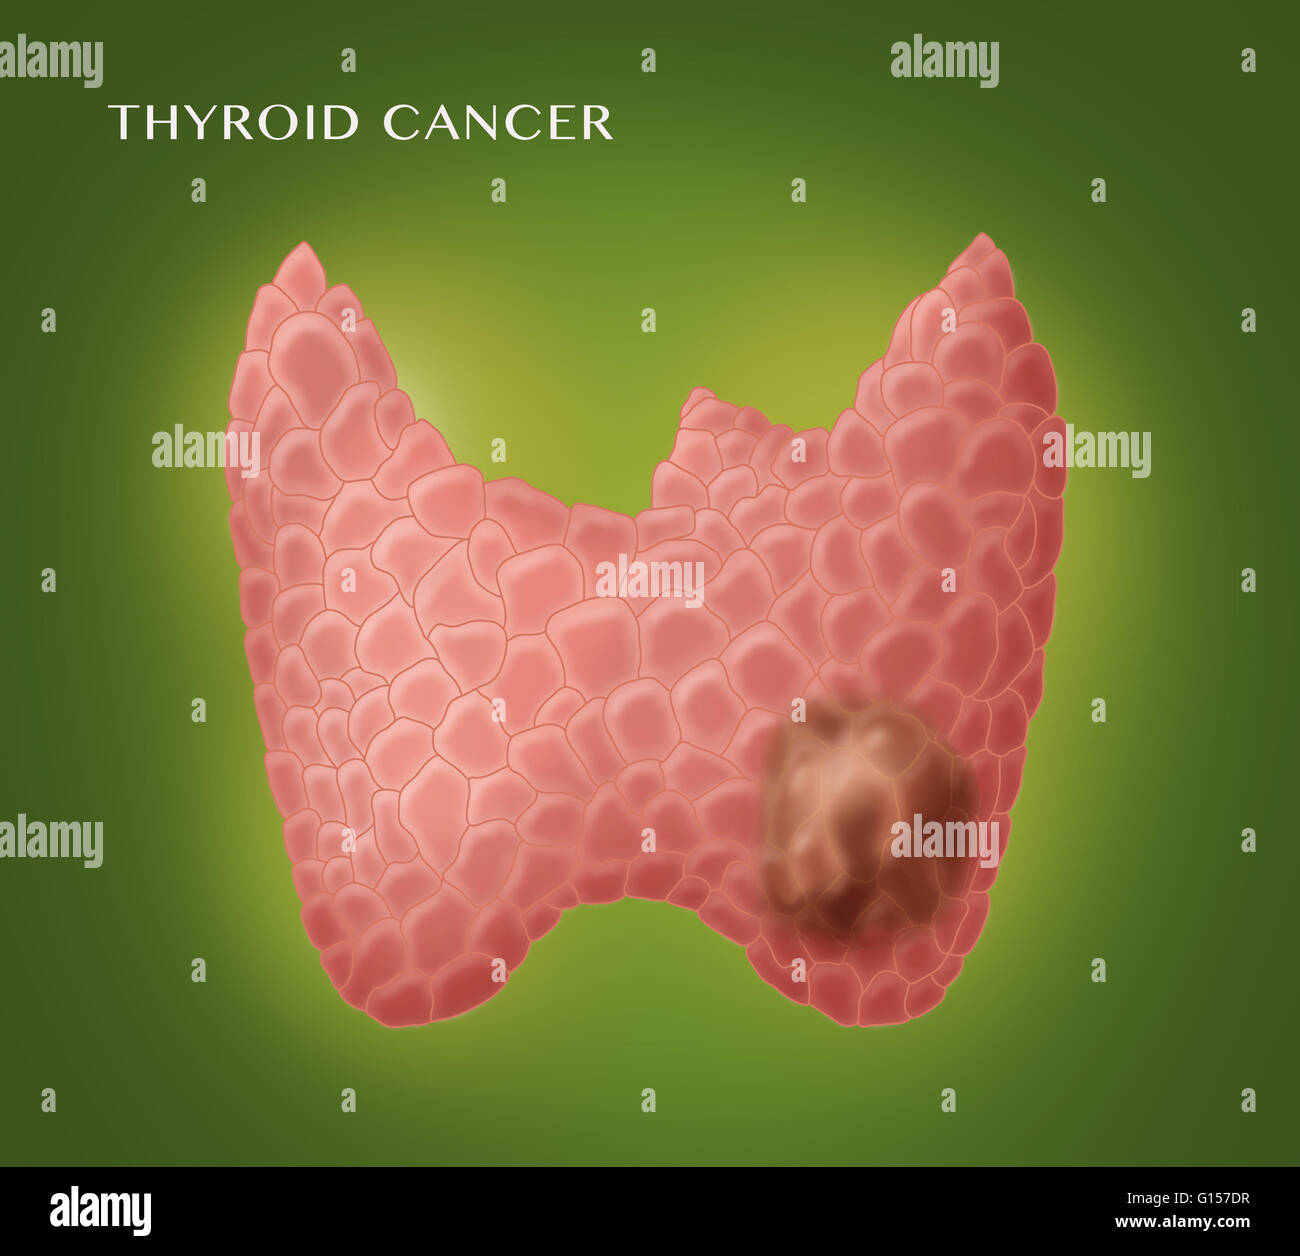 Illustration showing thyroid cancer. Stock Photo